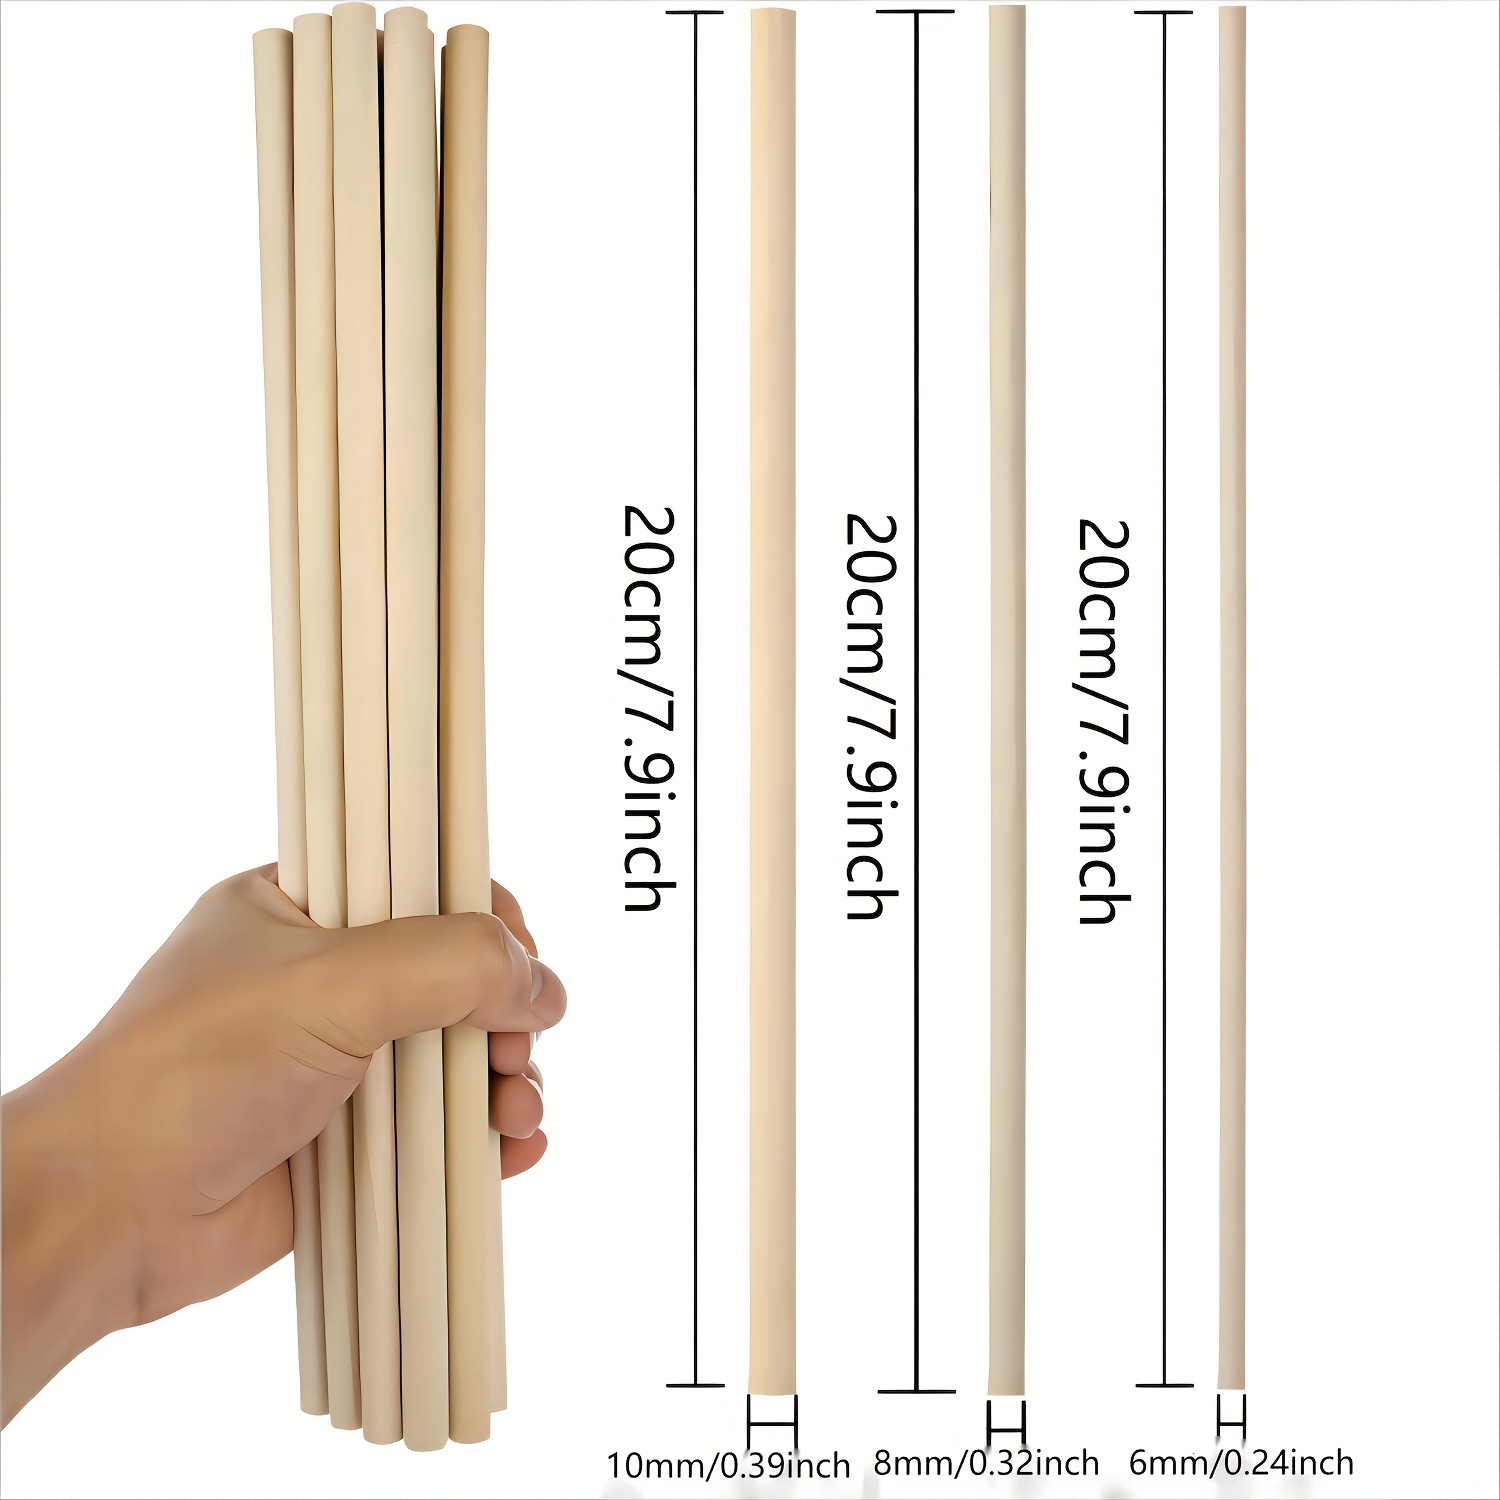 Bamboo Sticks Wooden Sticks for Craft Work and School Project Making ( 50  Sticks) 9 inches Approx.